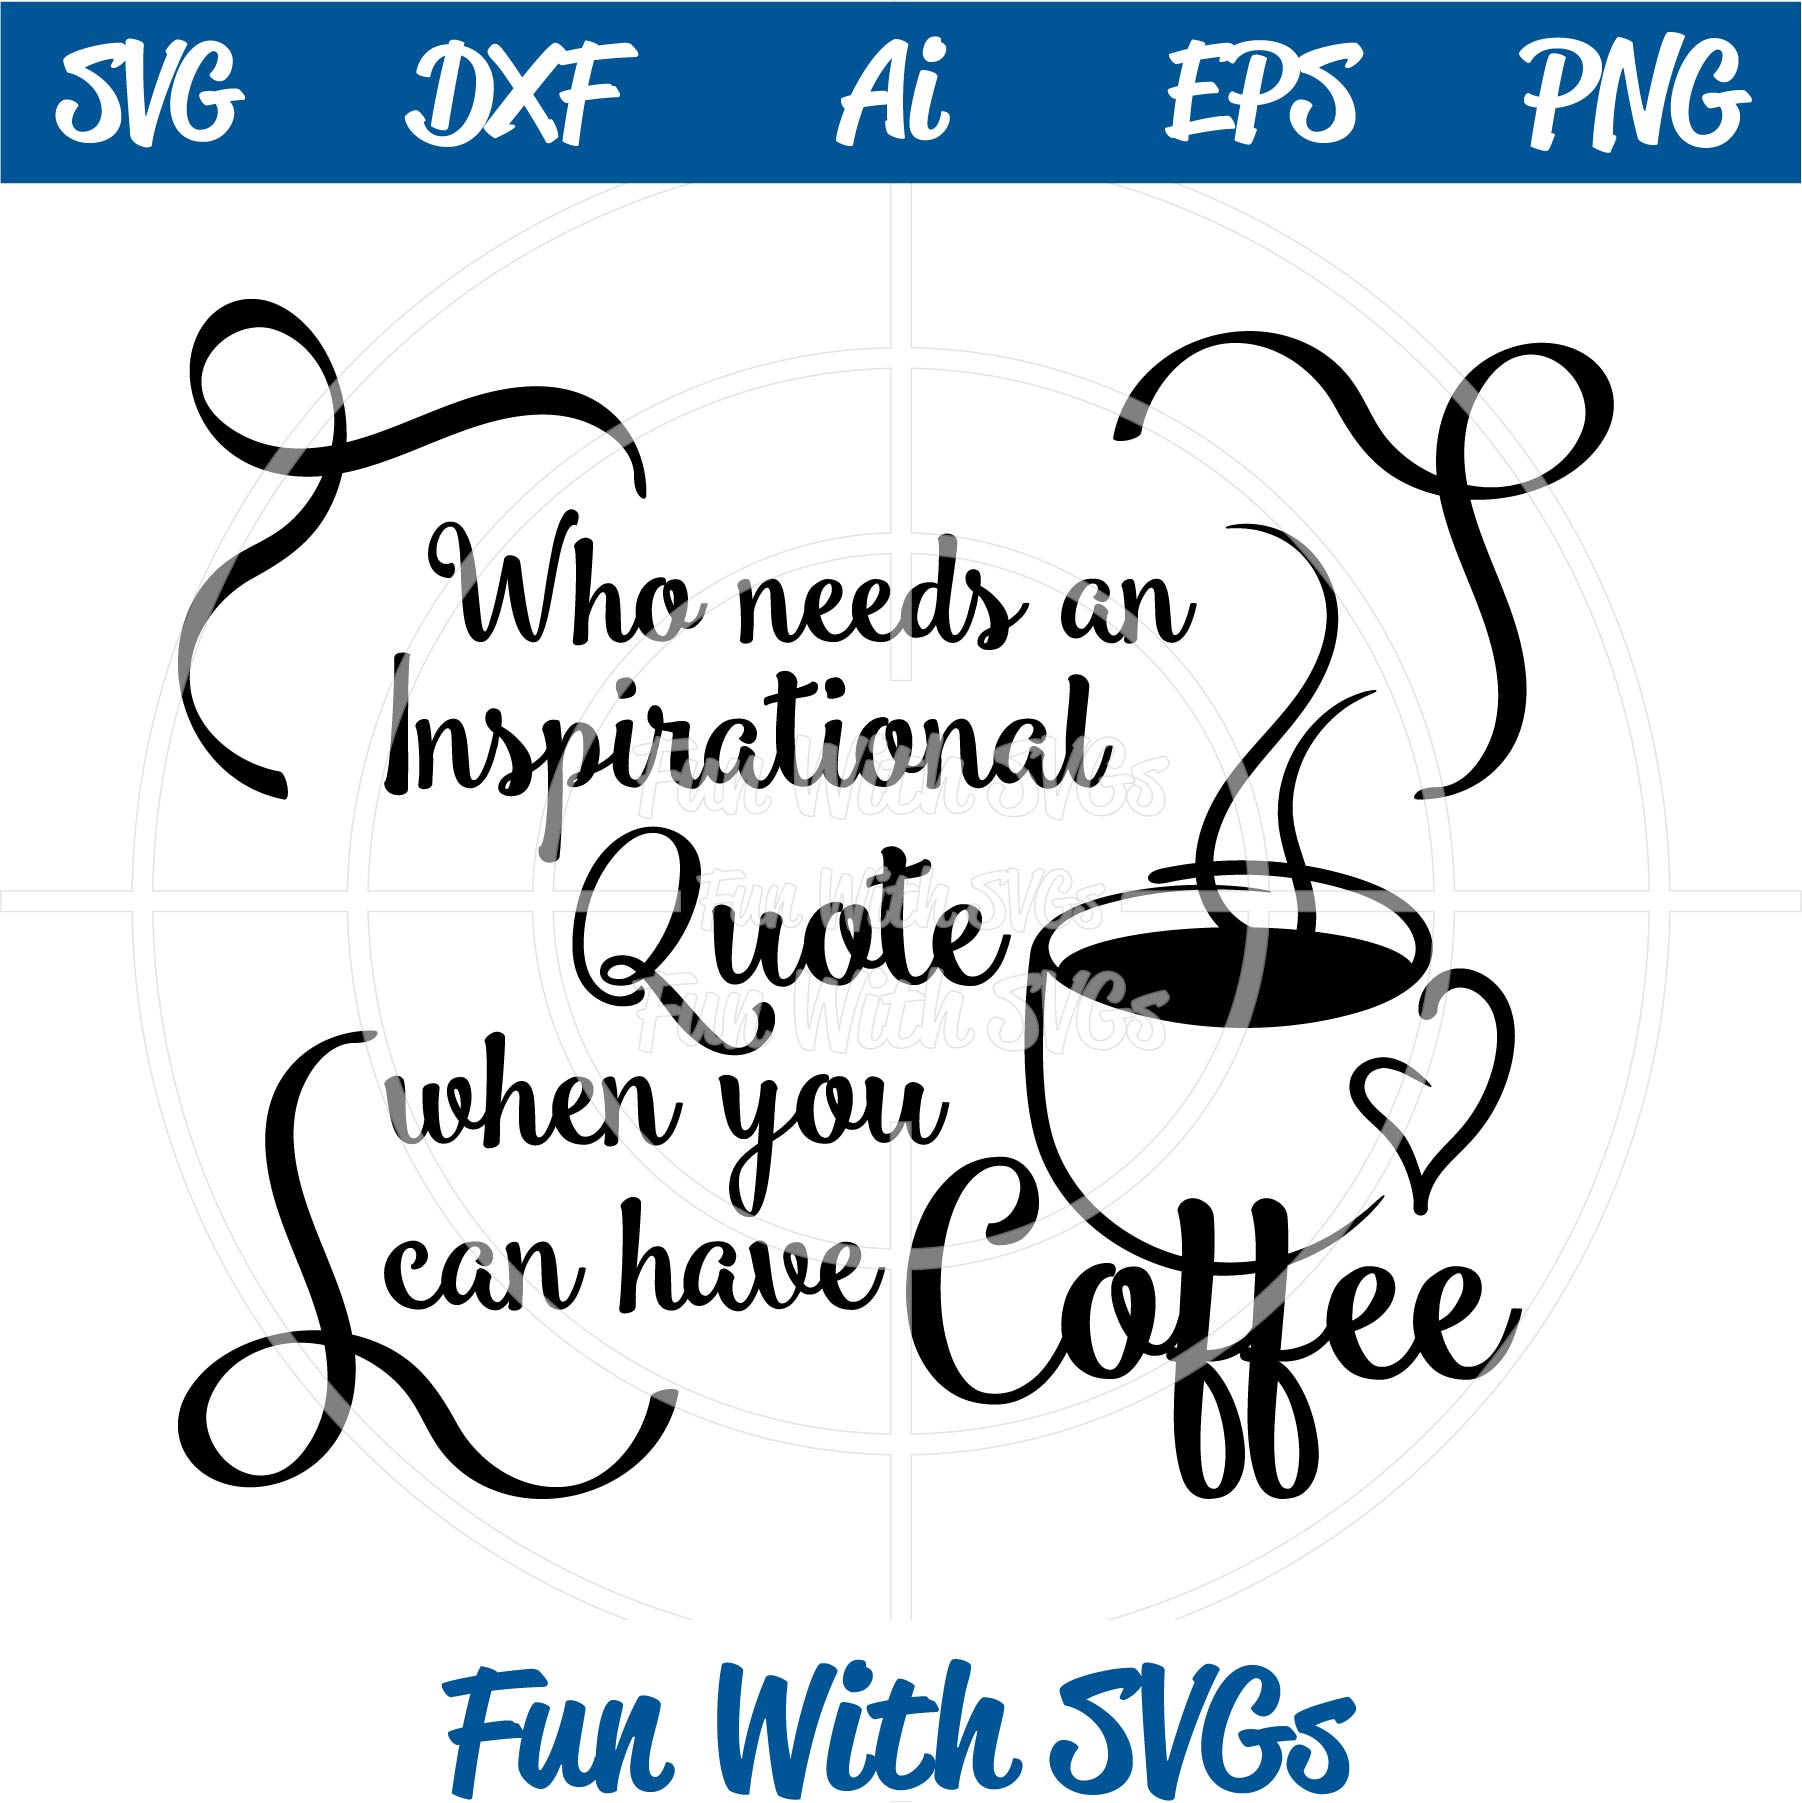 Inspirational Quote Morning Humor ~ Fun With SVGs